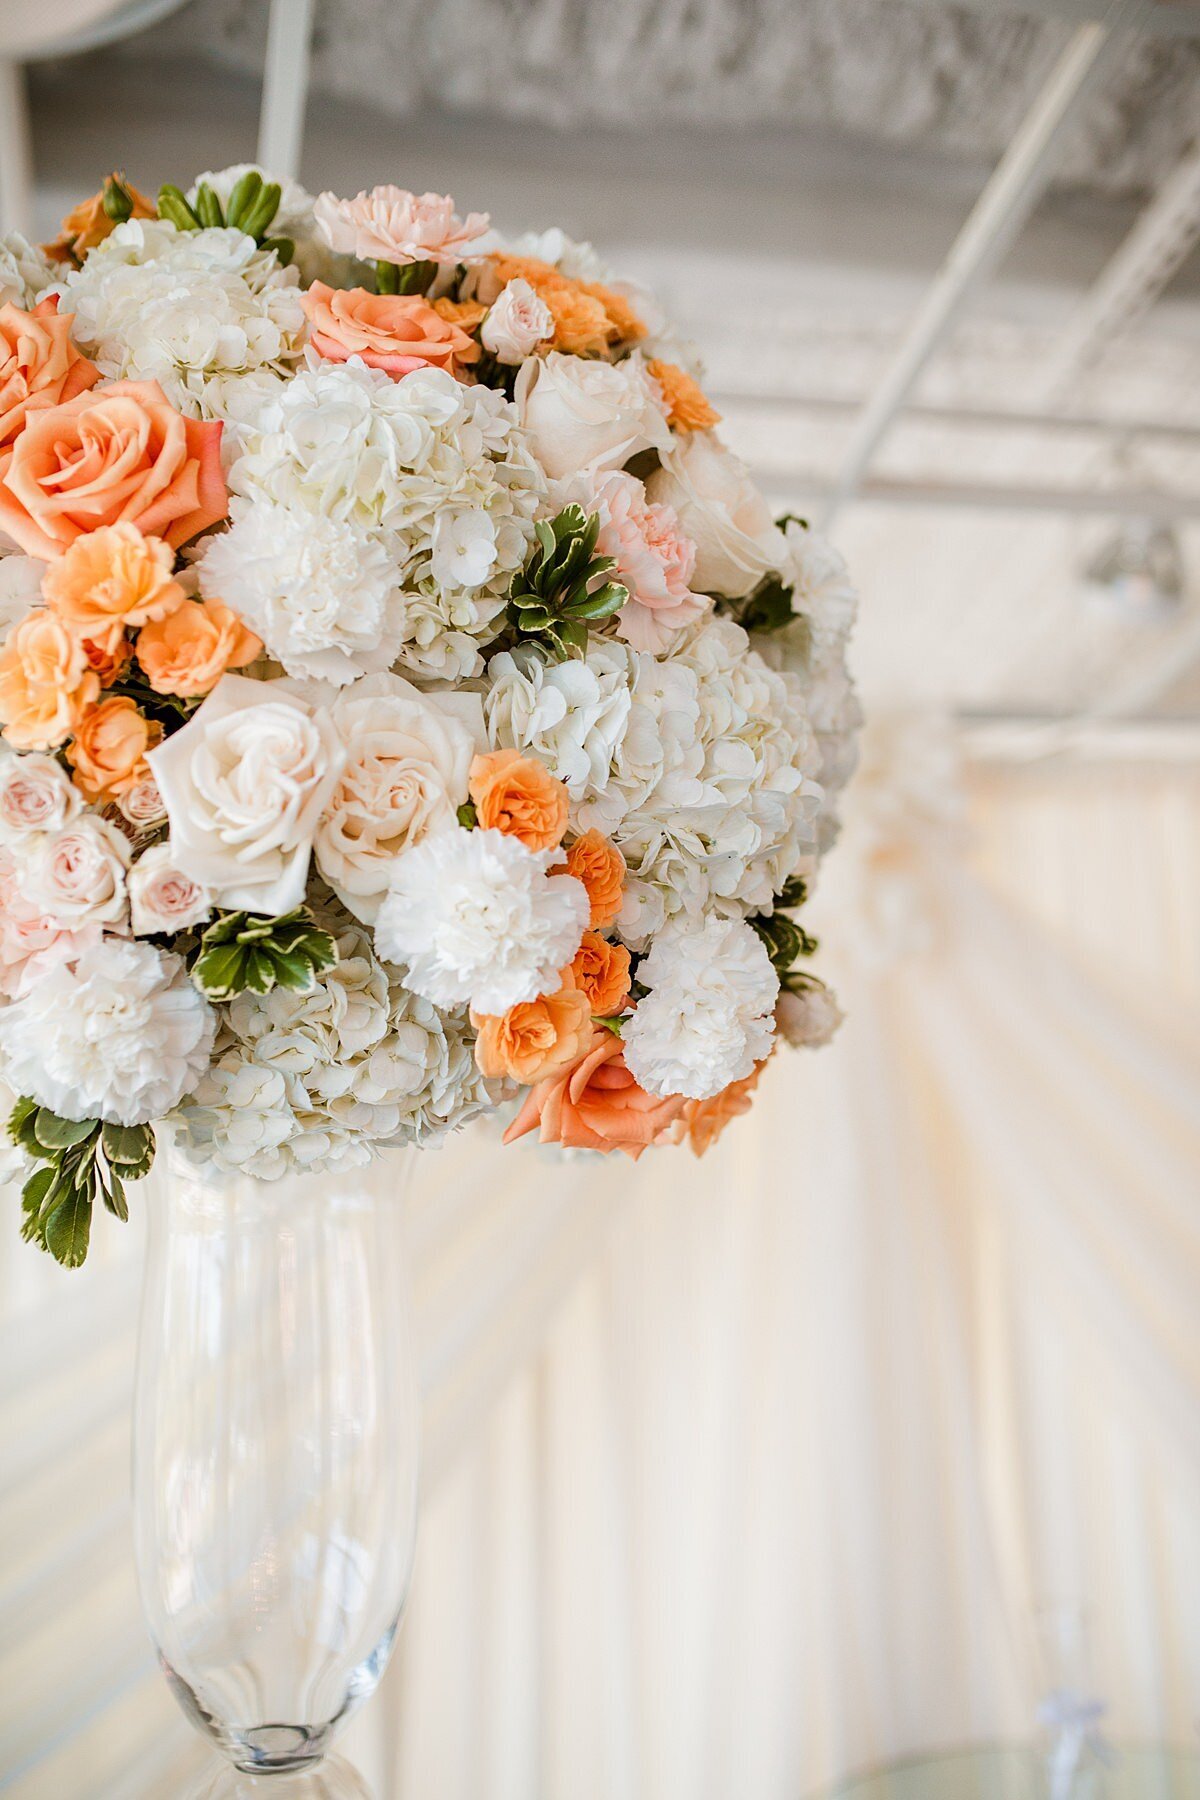 Sitting on top of a tall glass vase in front of a white draped wall at The Liff Center is a large round floral centerpiece. the centerpiece consists of white hydrangea, ivory roses, white carnations, peach tea roses, orange roses, blush tea roses and hints of white tipped greenery.